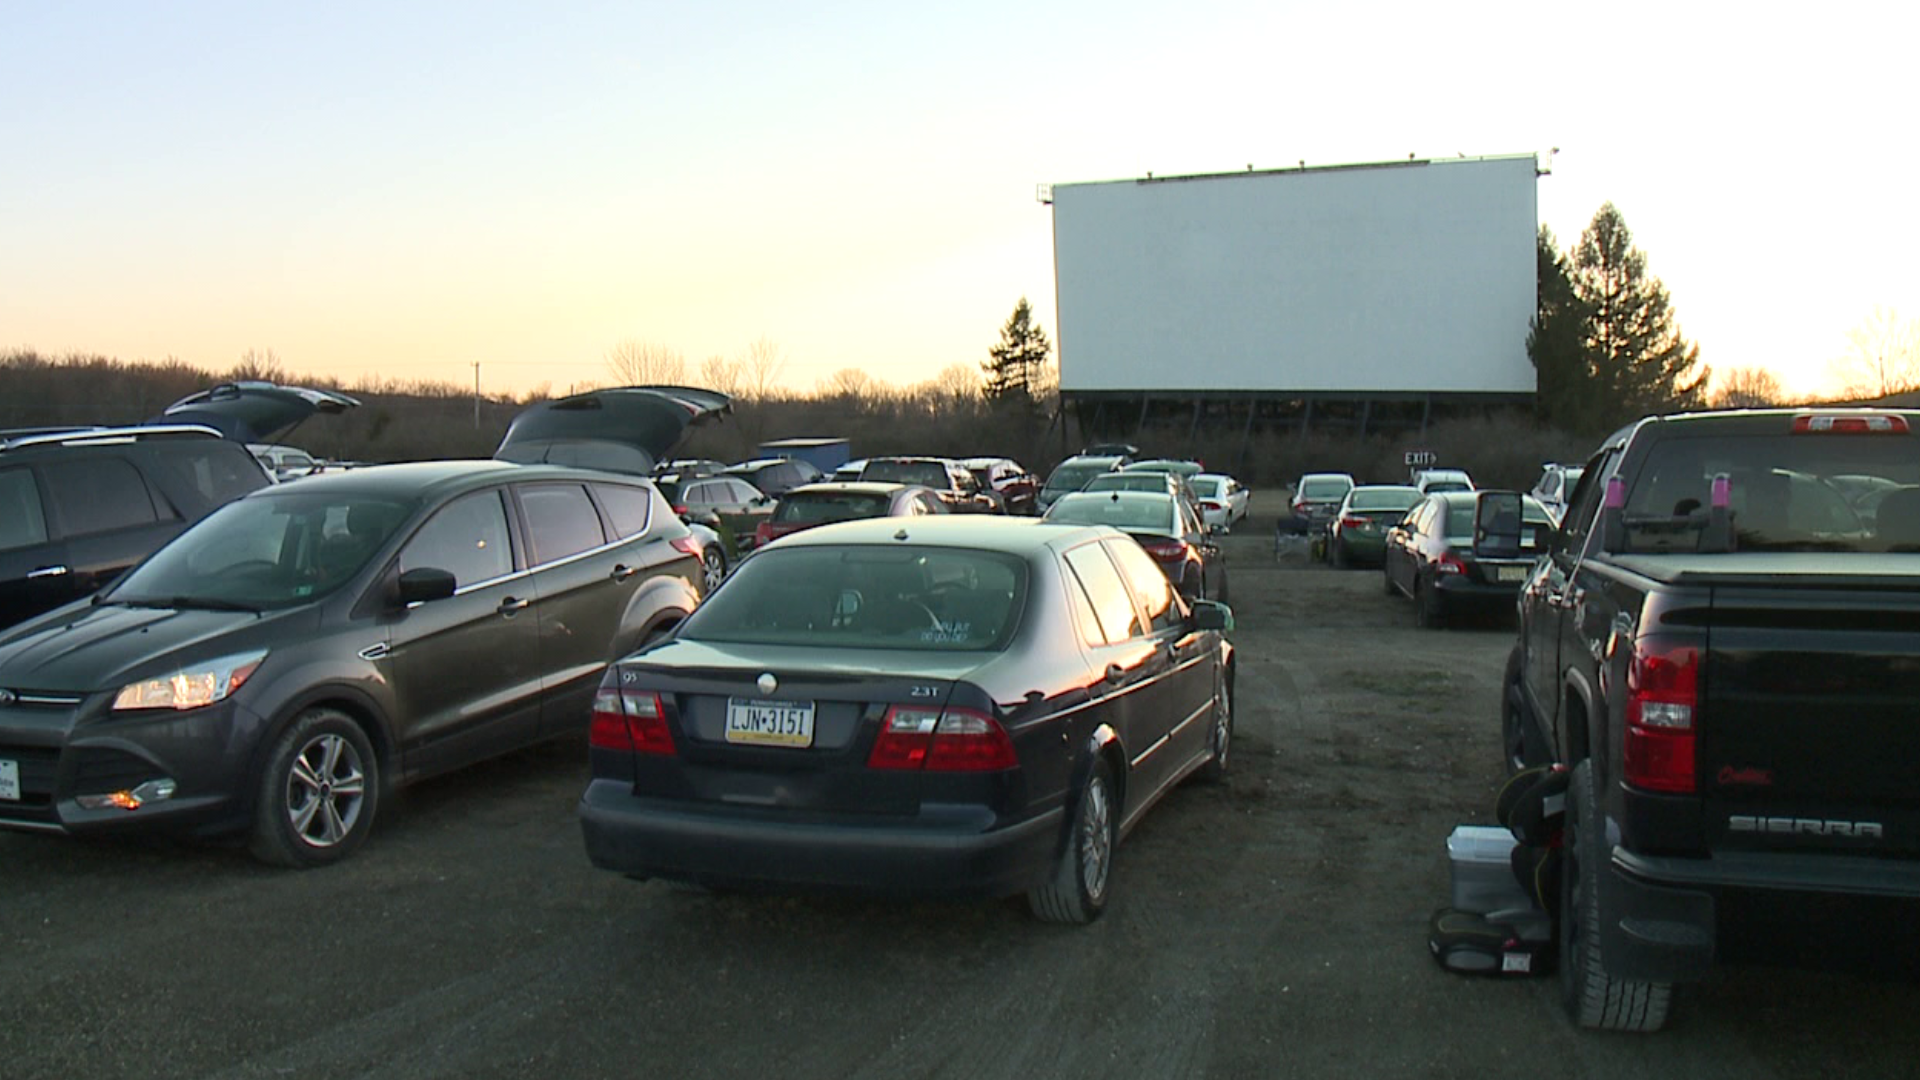 The Mahoning Drive-In showed The Wizard of Oz and Willy Wonka.